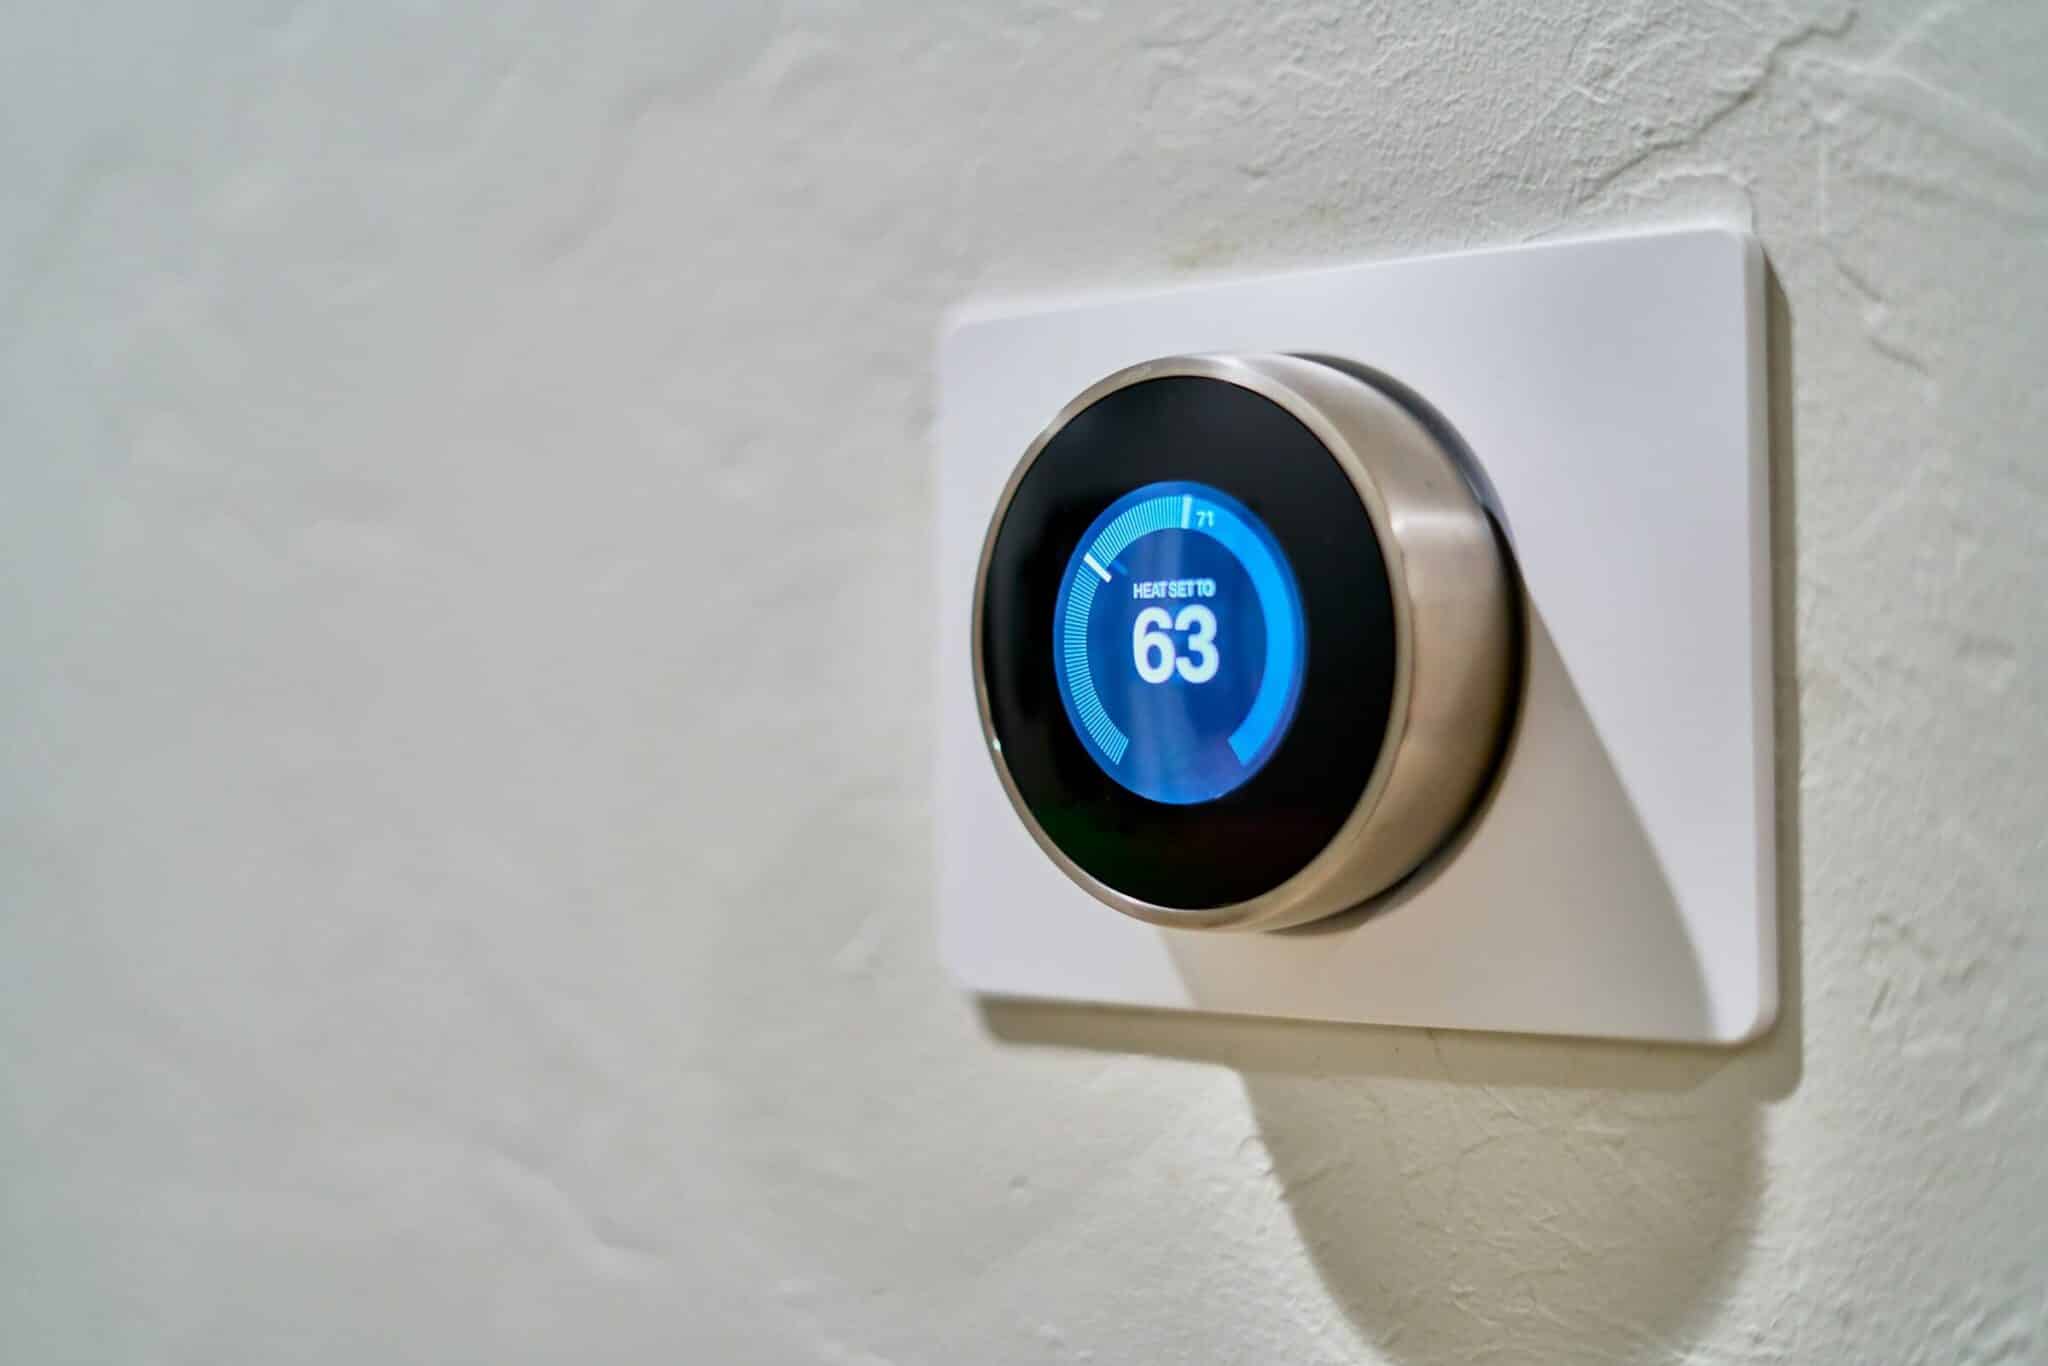 AC Smart Thermostats Are They Worth the Investment: An image of a smart thermostat on a wall.